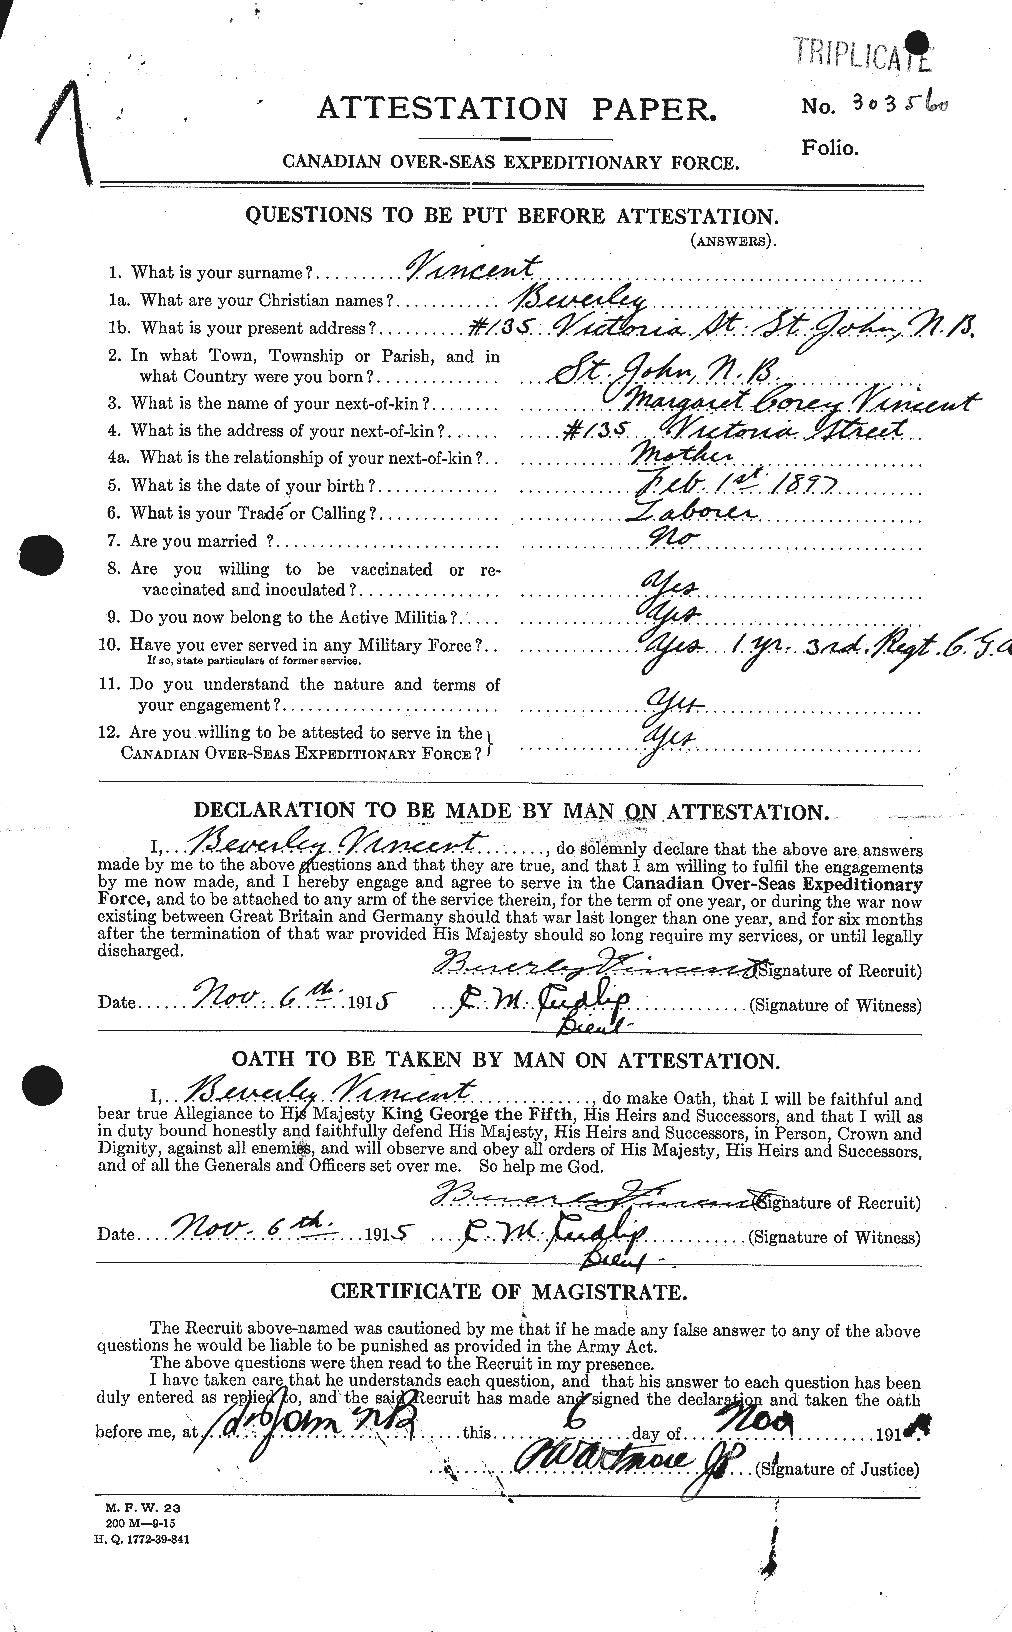 Personnel Records of the First World War - CEF 653979a